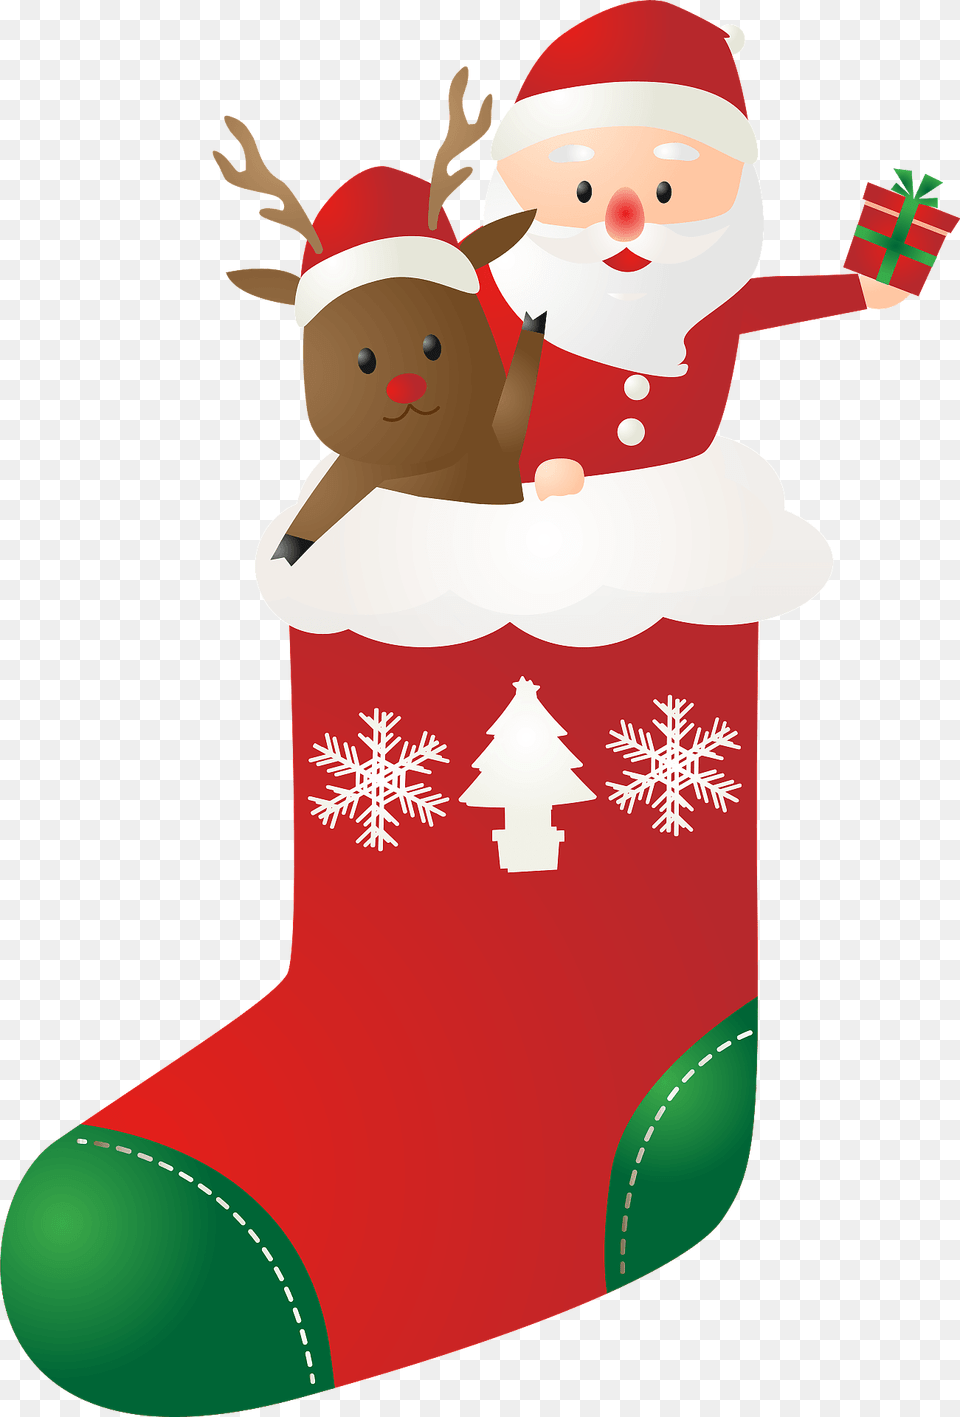 Santa And Reindeer Are In A Christmas Stocking Clipart, Hosiery, Festival, Clothing, Christmas Decorations Free Transparent Png